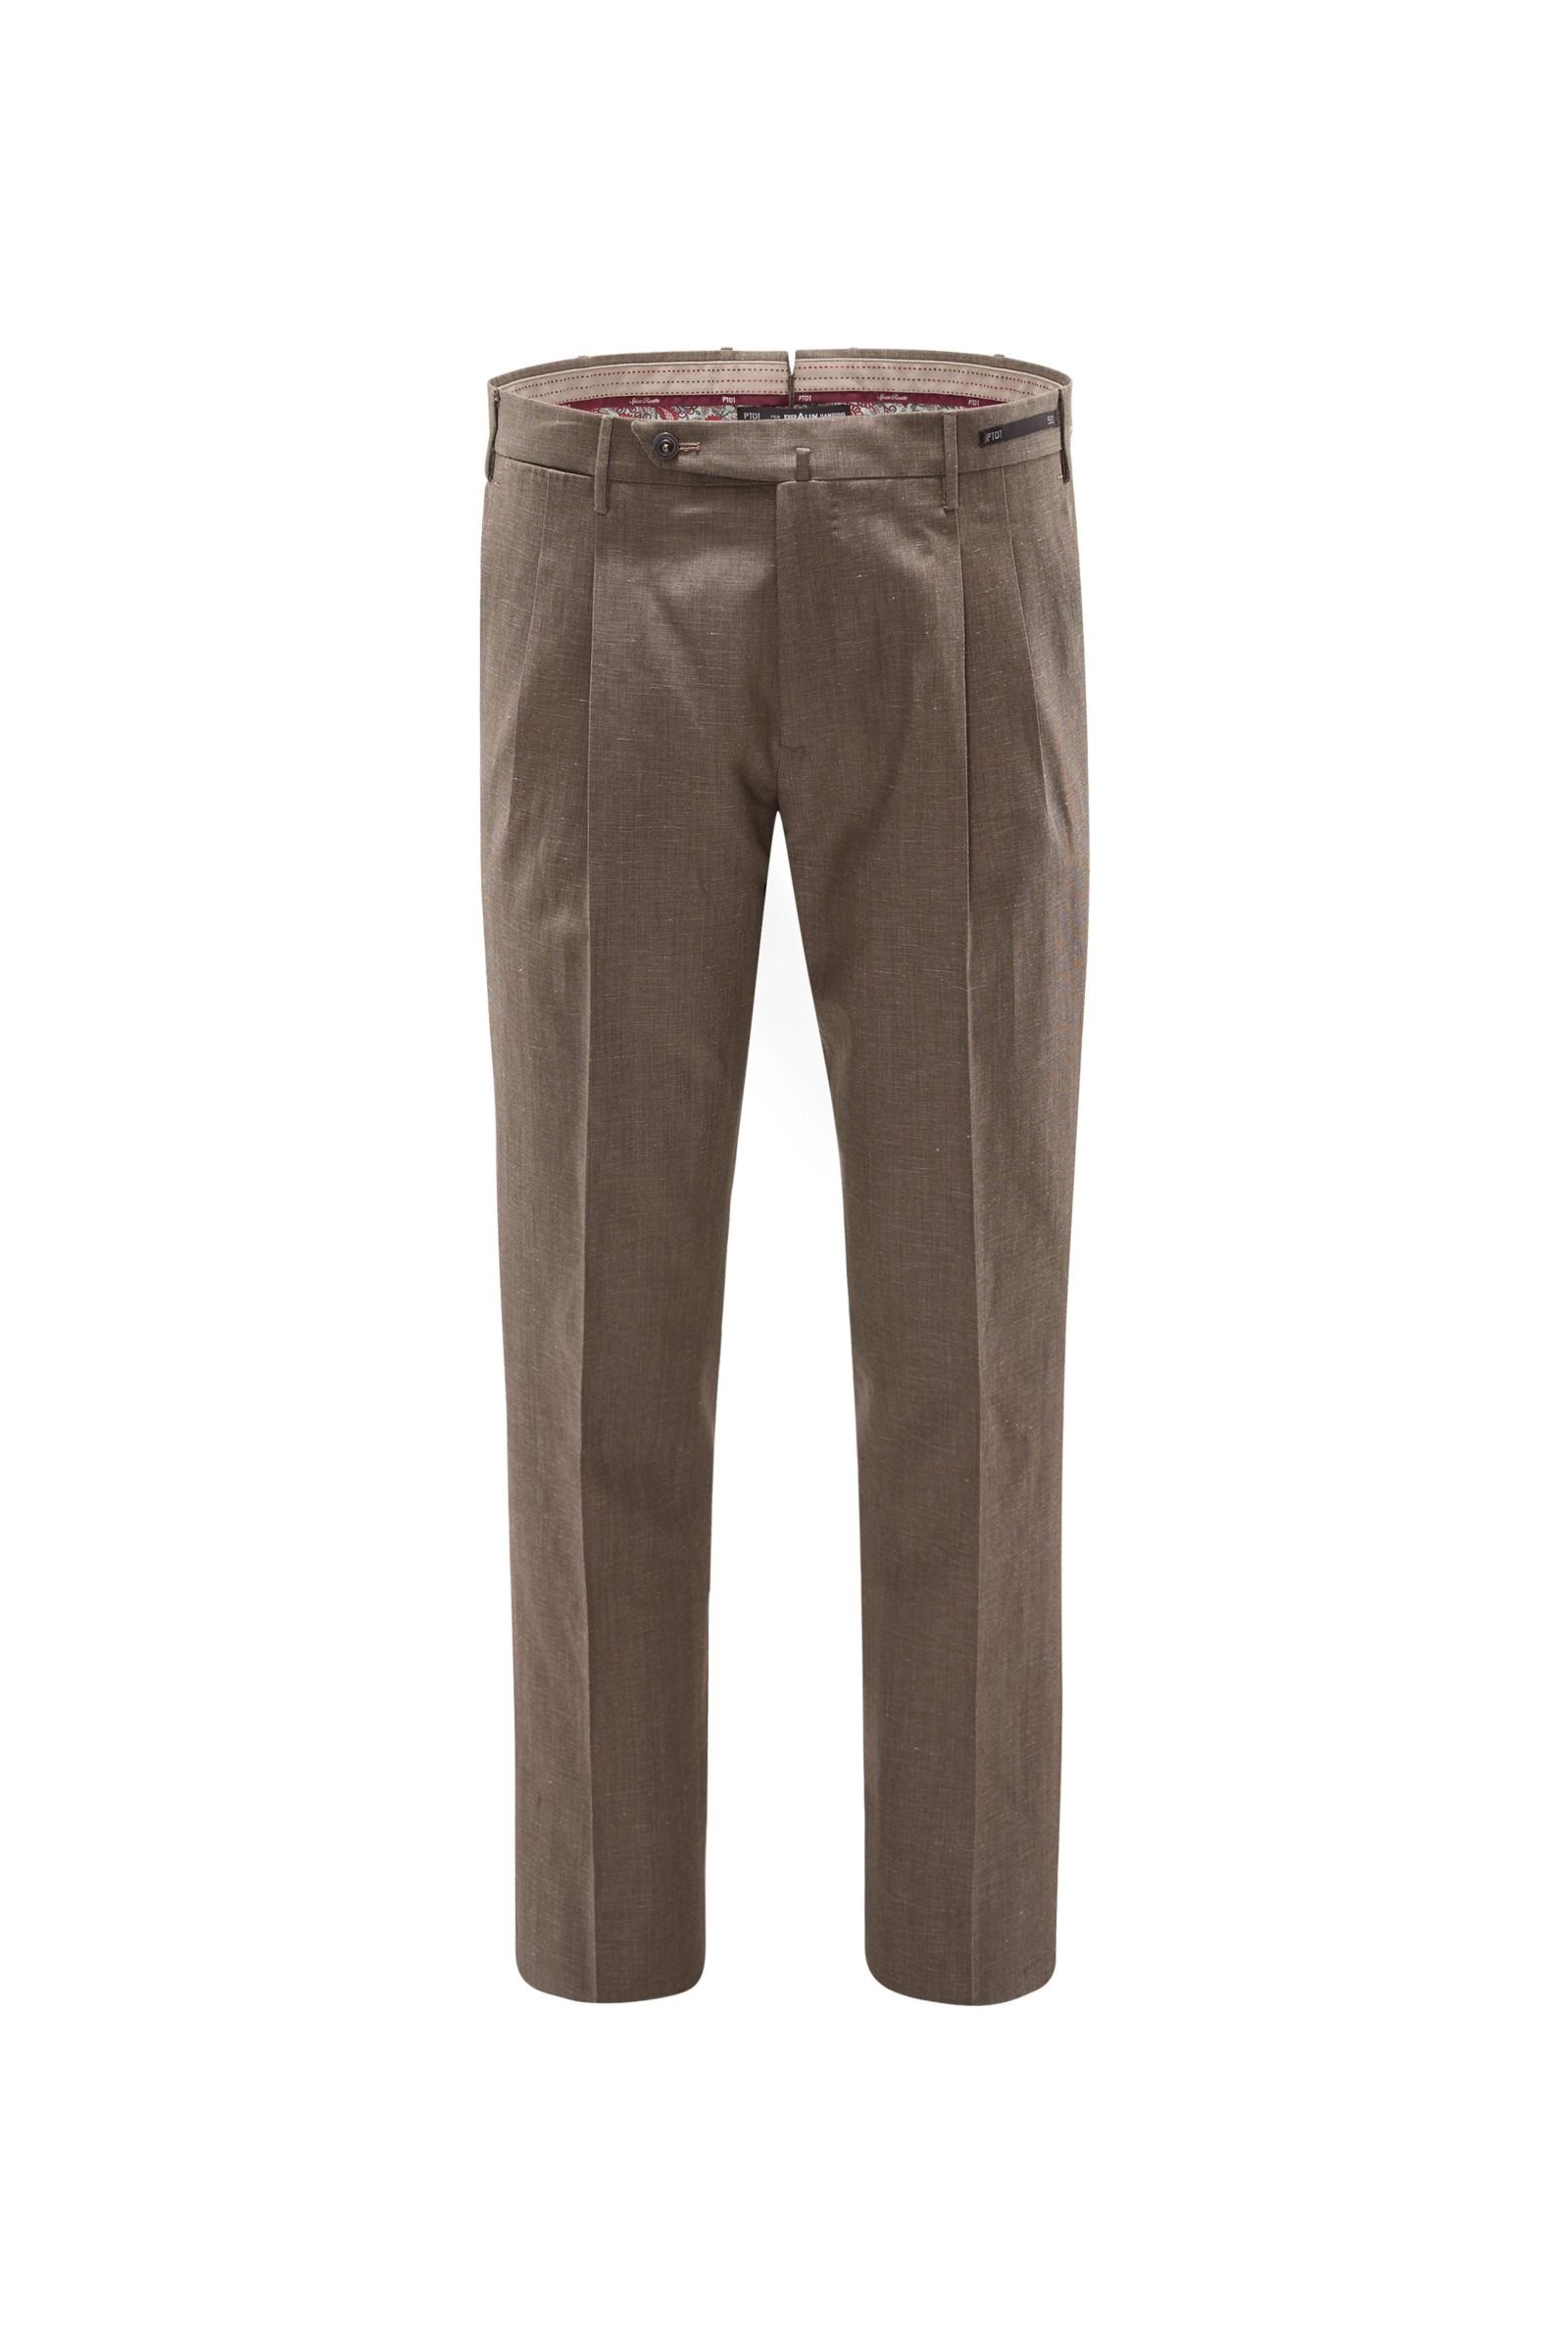 Chambray trousers 'Spice Route Preppy Fit' brown